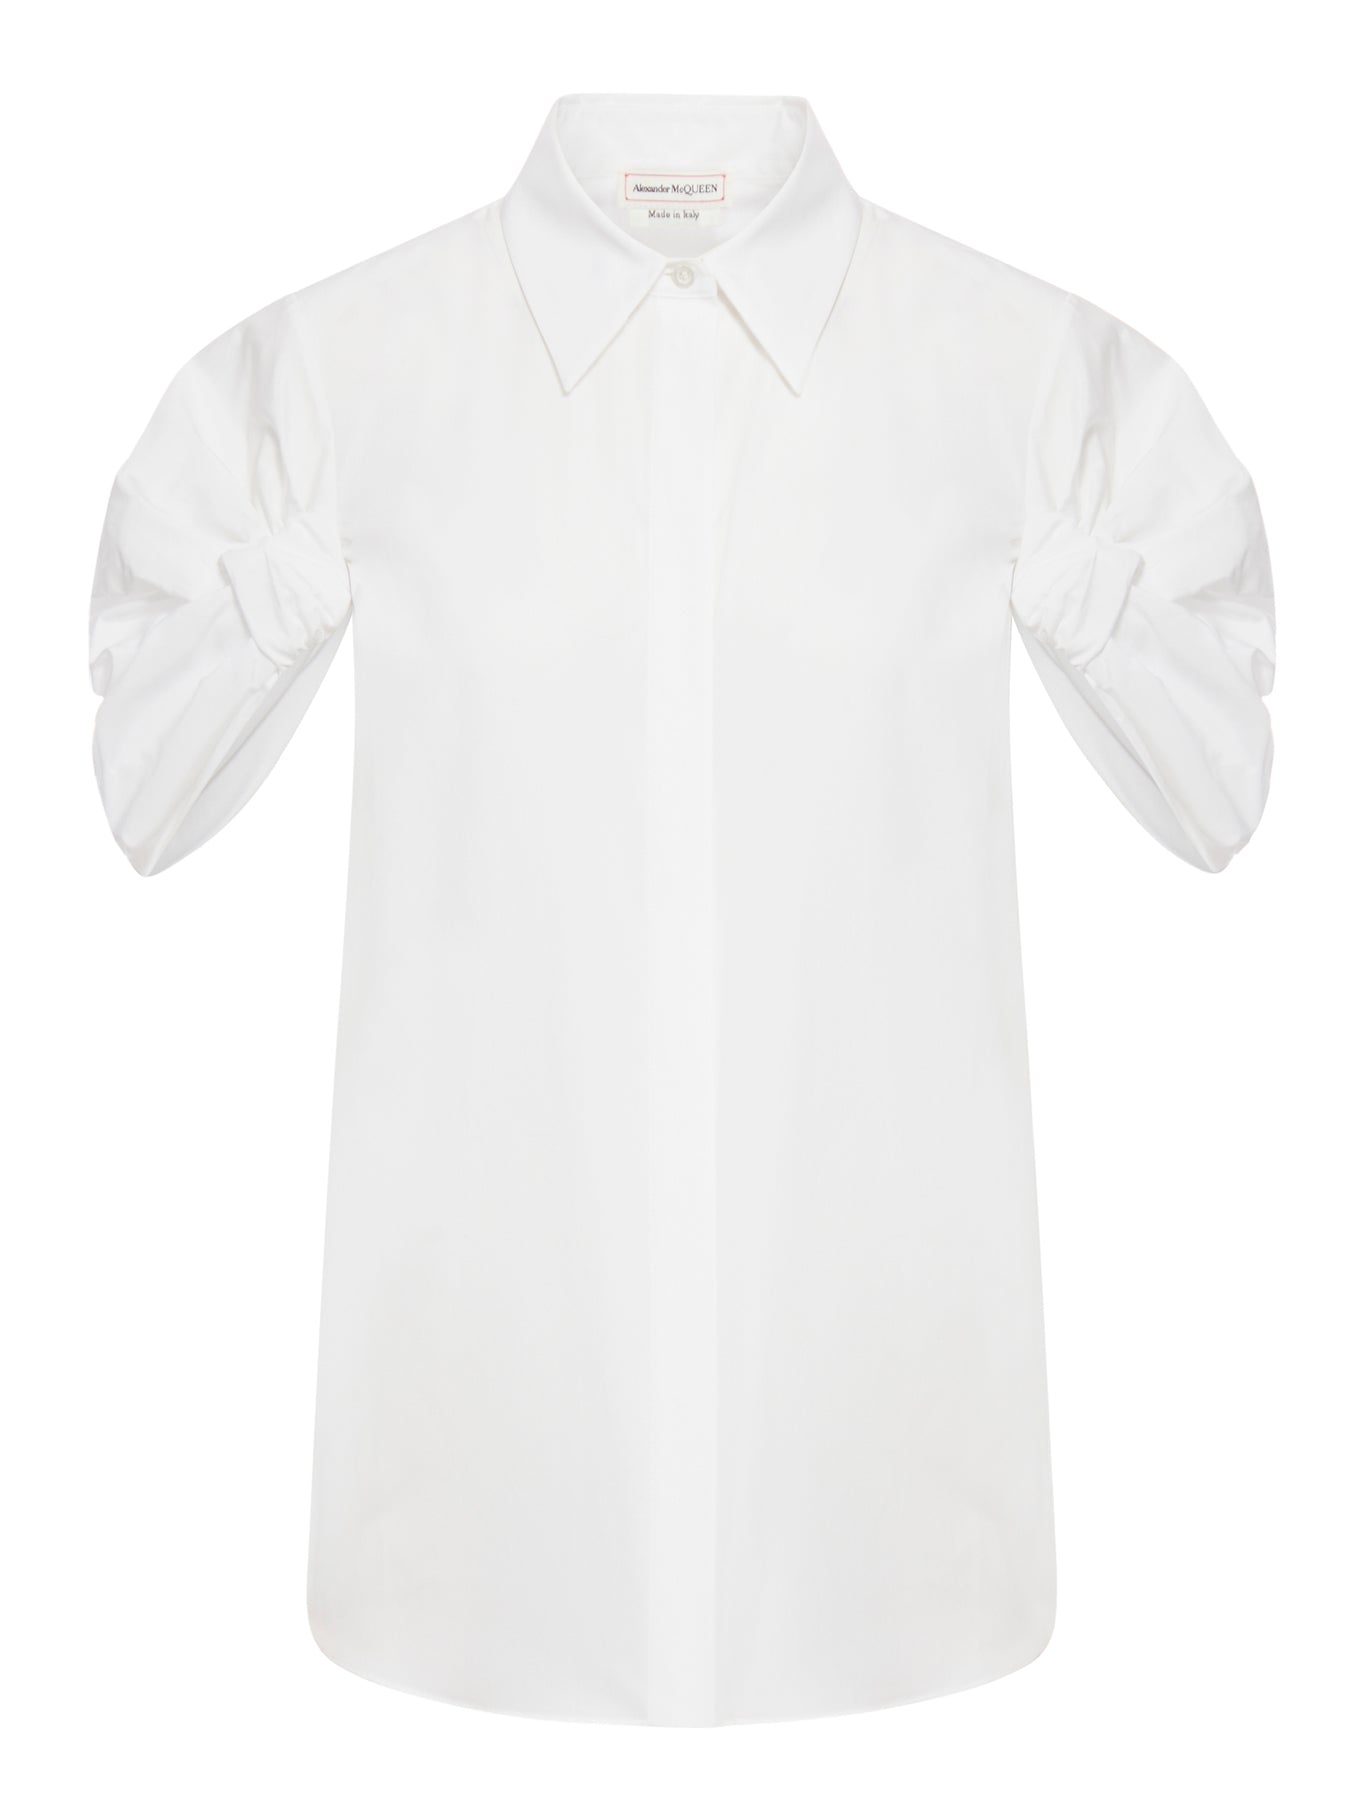 shirt with details on the sleeves